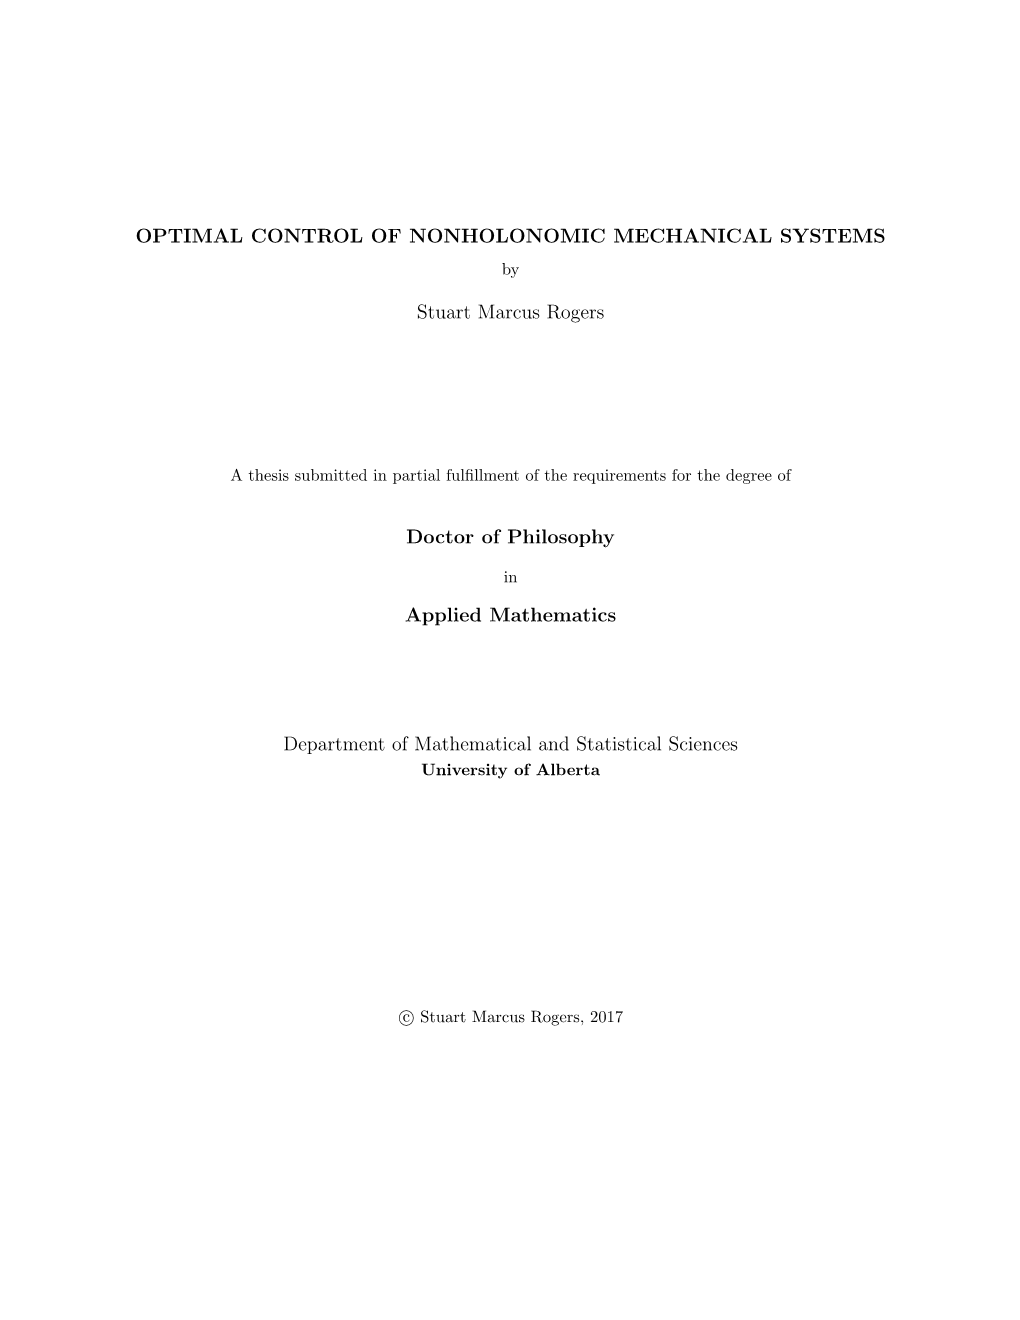 OPTIMAL CONTROL of NONHOLONOMIC MECHANICAL SYSTEMS By